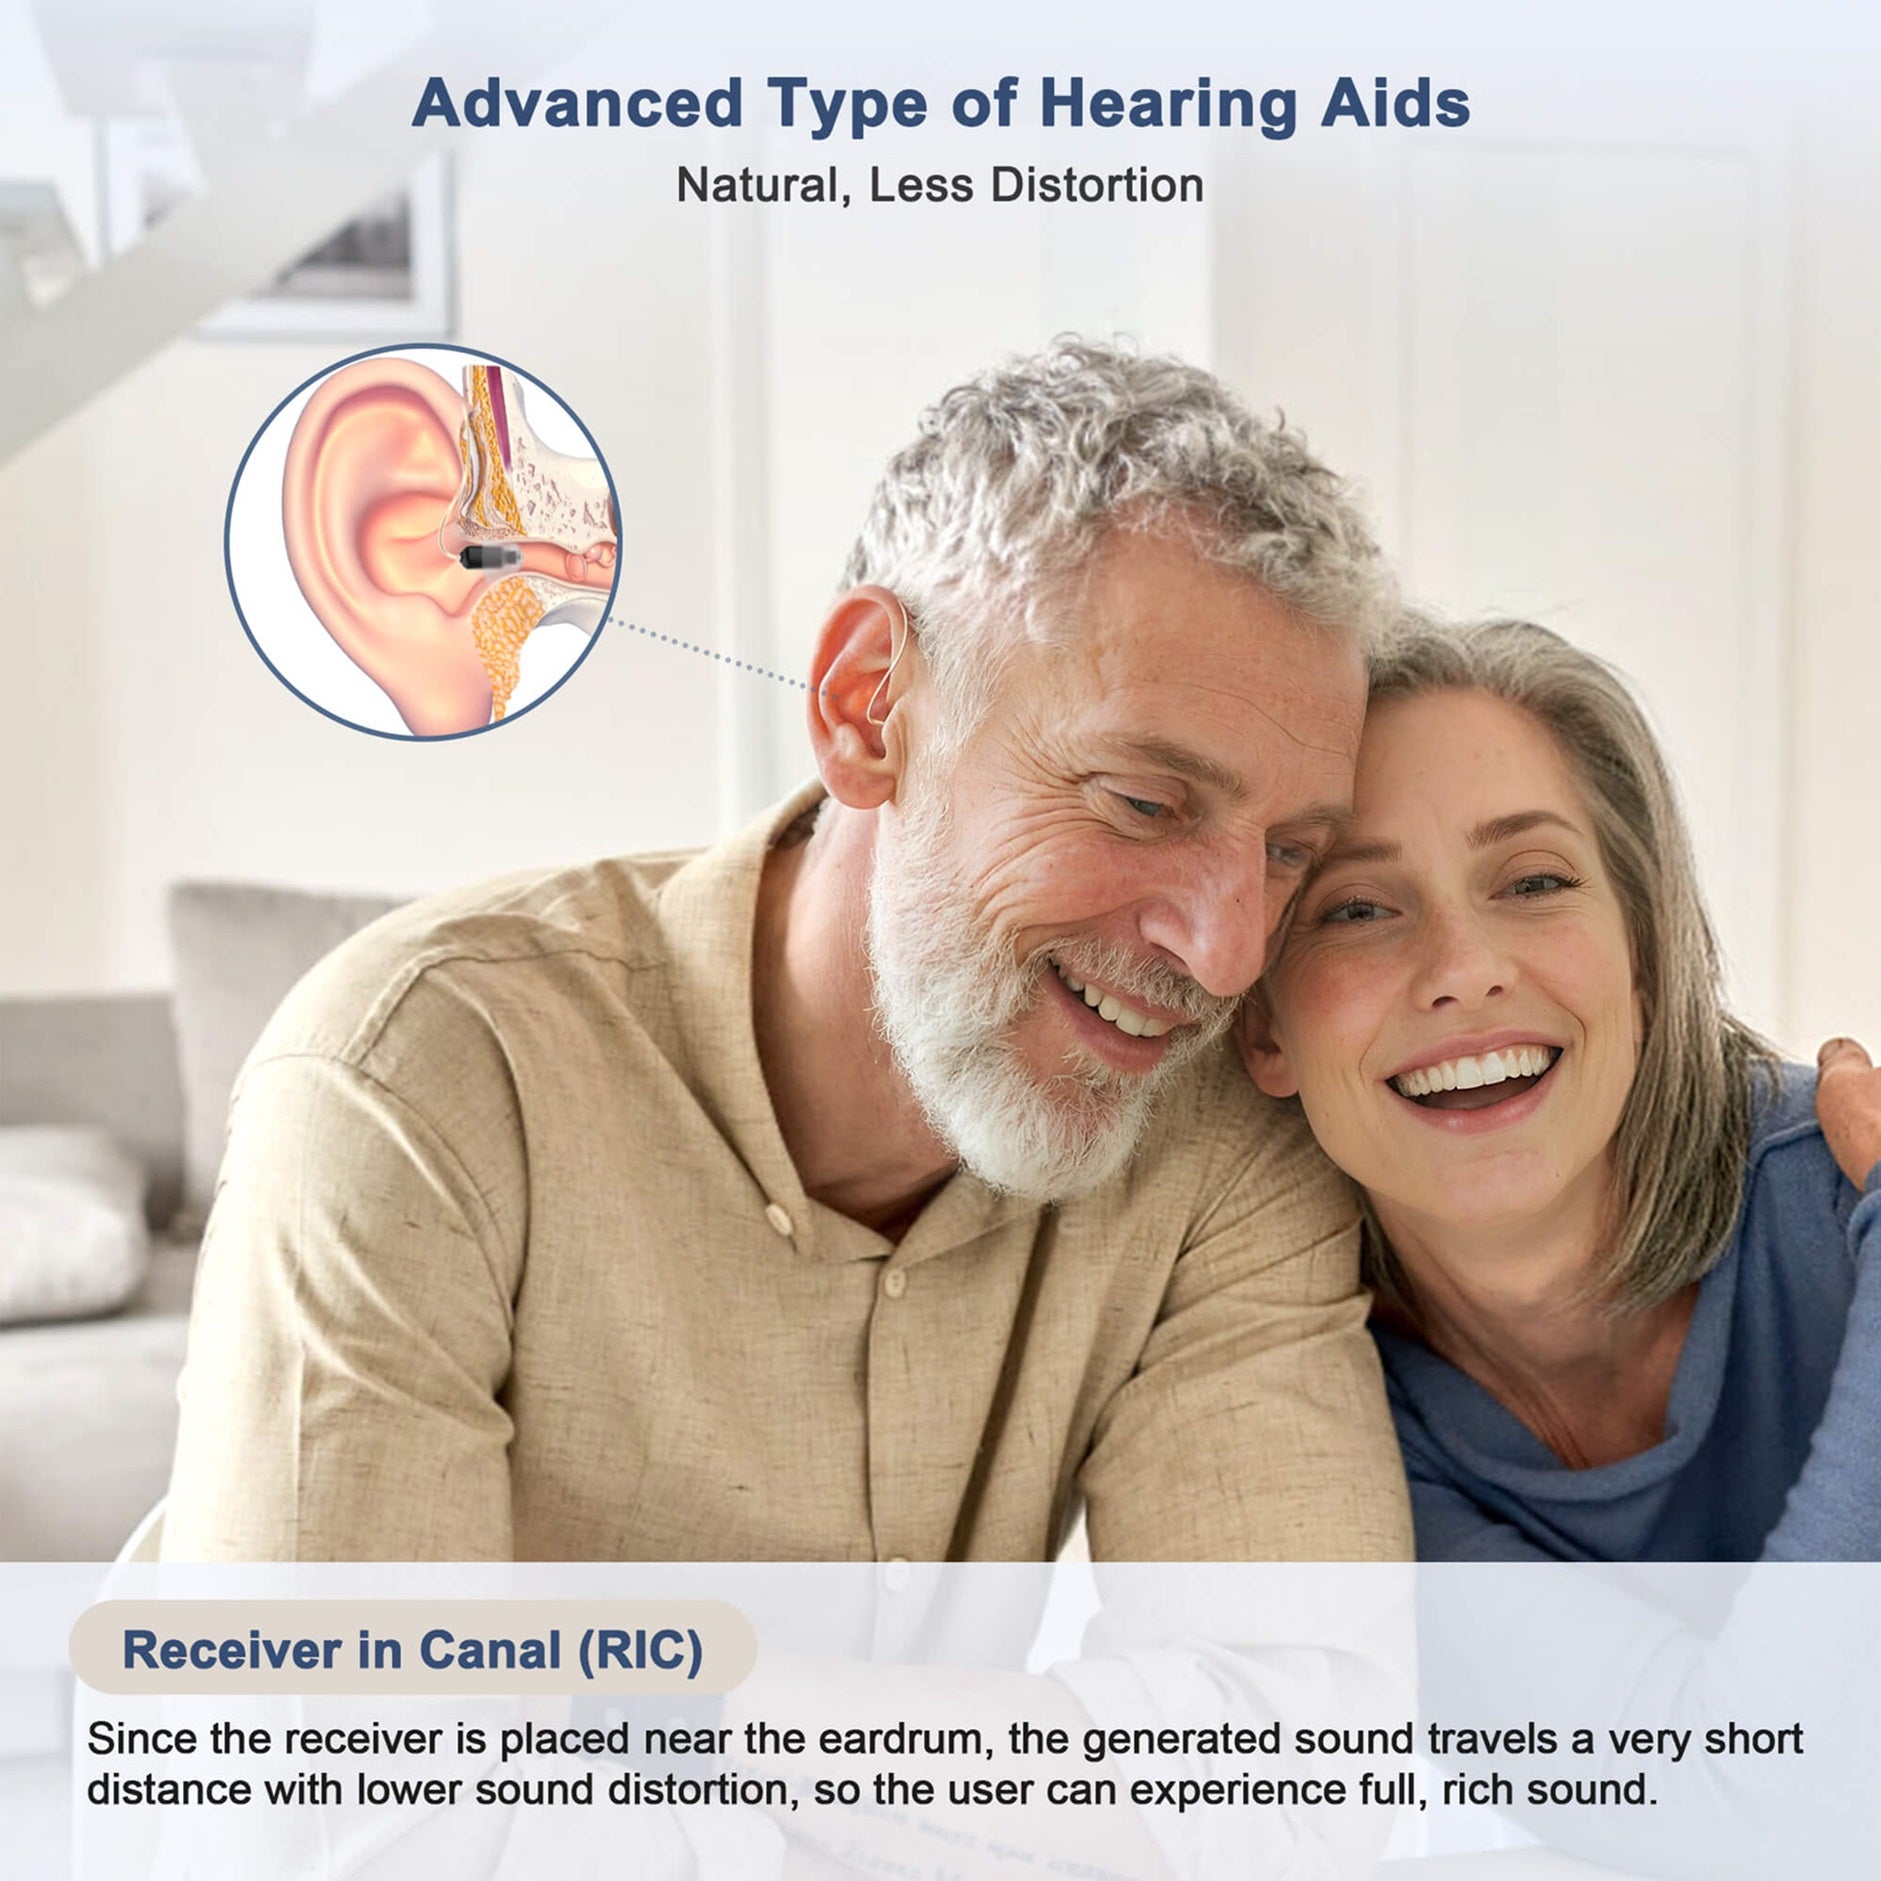 Hearing Aid Amplifiers - Lucid516 RIC-b2: Dual Microphones, Assistive Listening Devices, Behind the Ear Hearing Aid